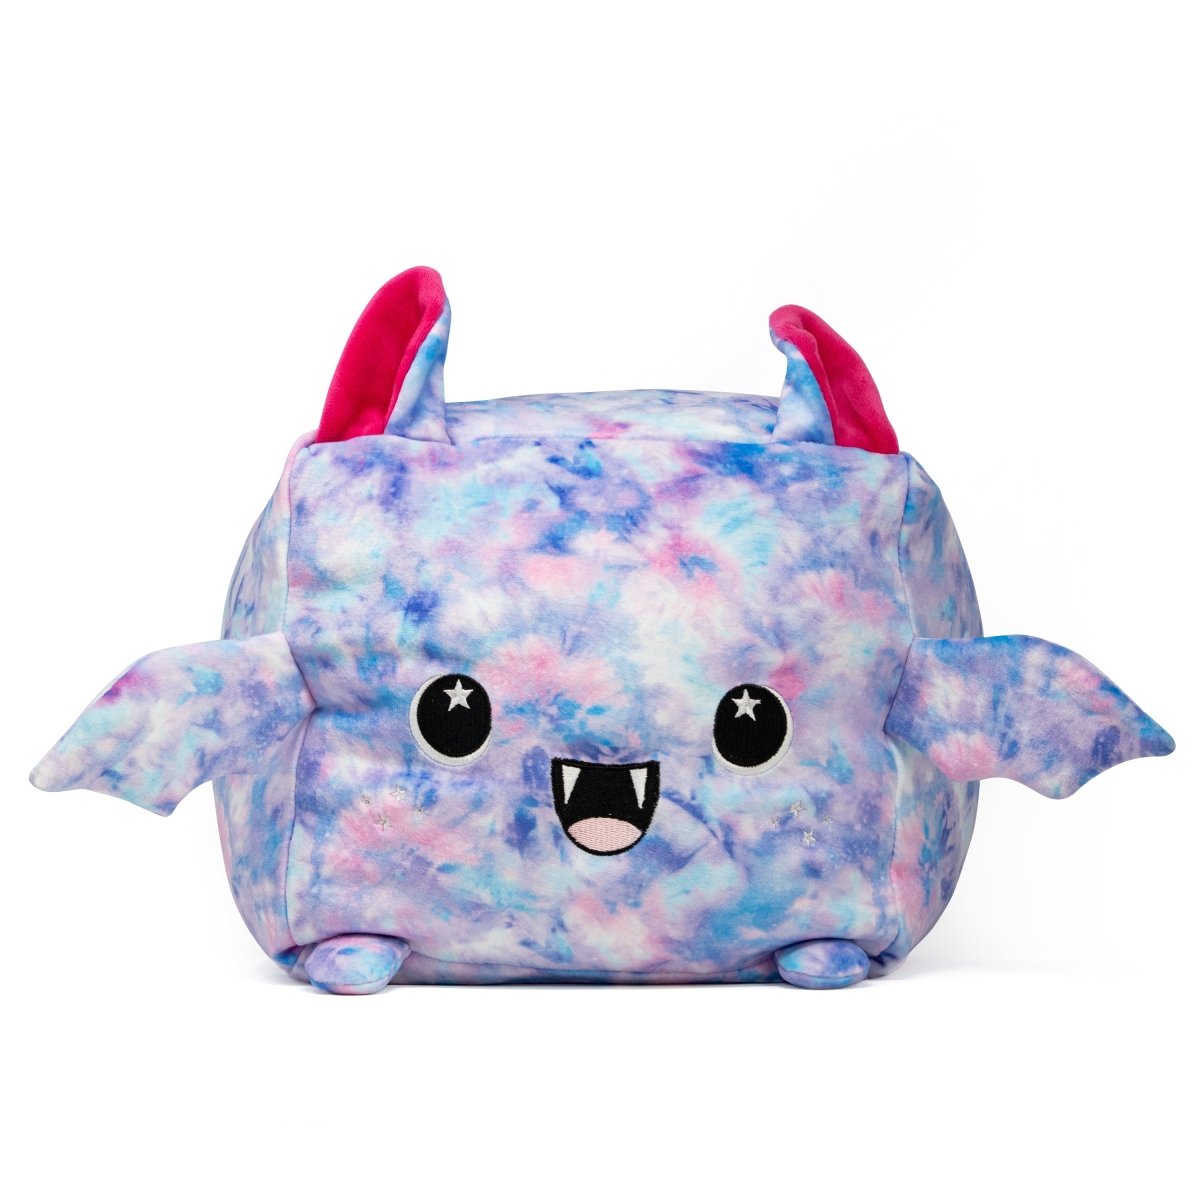 Lyra the Bat plush toy with tie-dye fur, little fangs, and vibrant wings from Moosh-Moosh SQUARED² Collection.